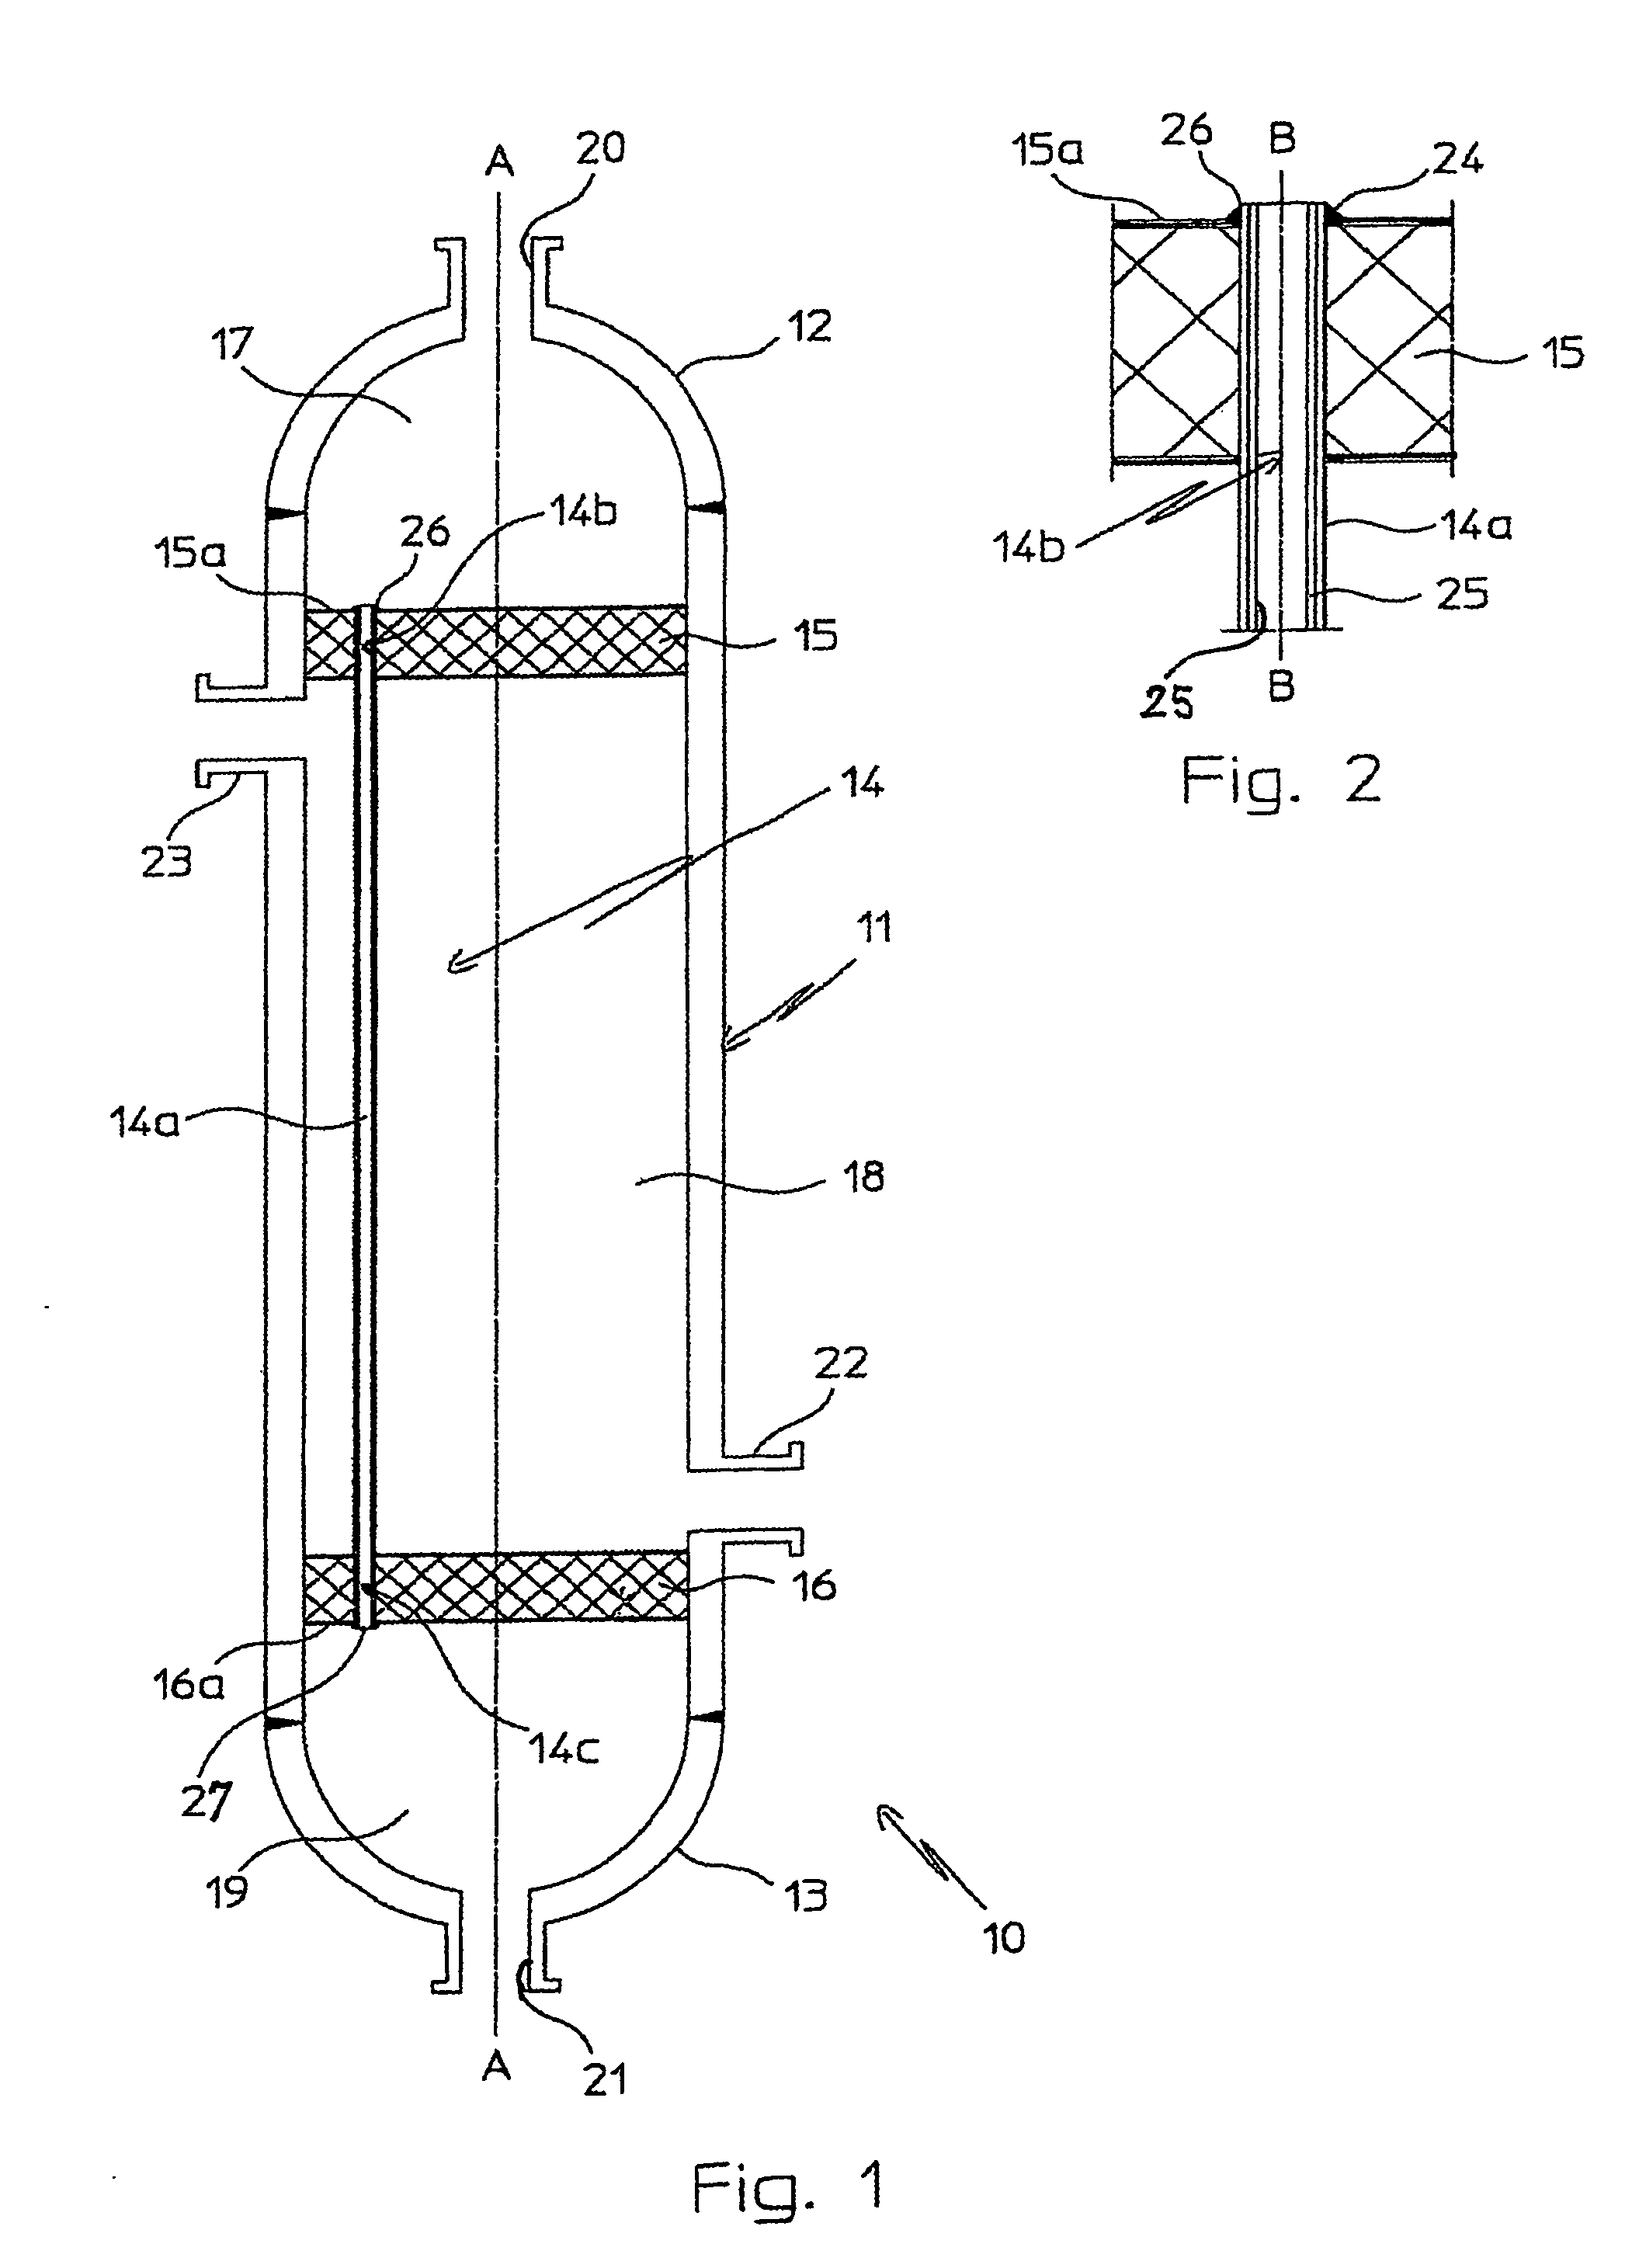 Apparatus for Processing Highly Corrosive Agents